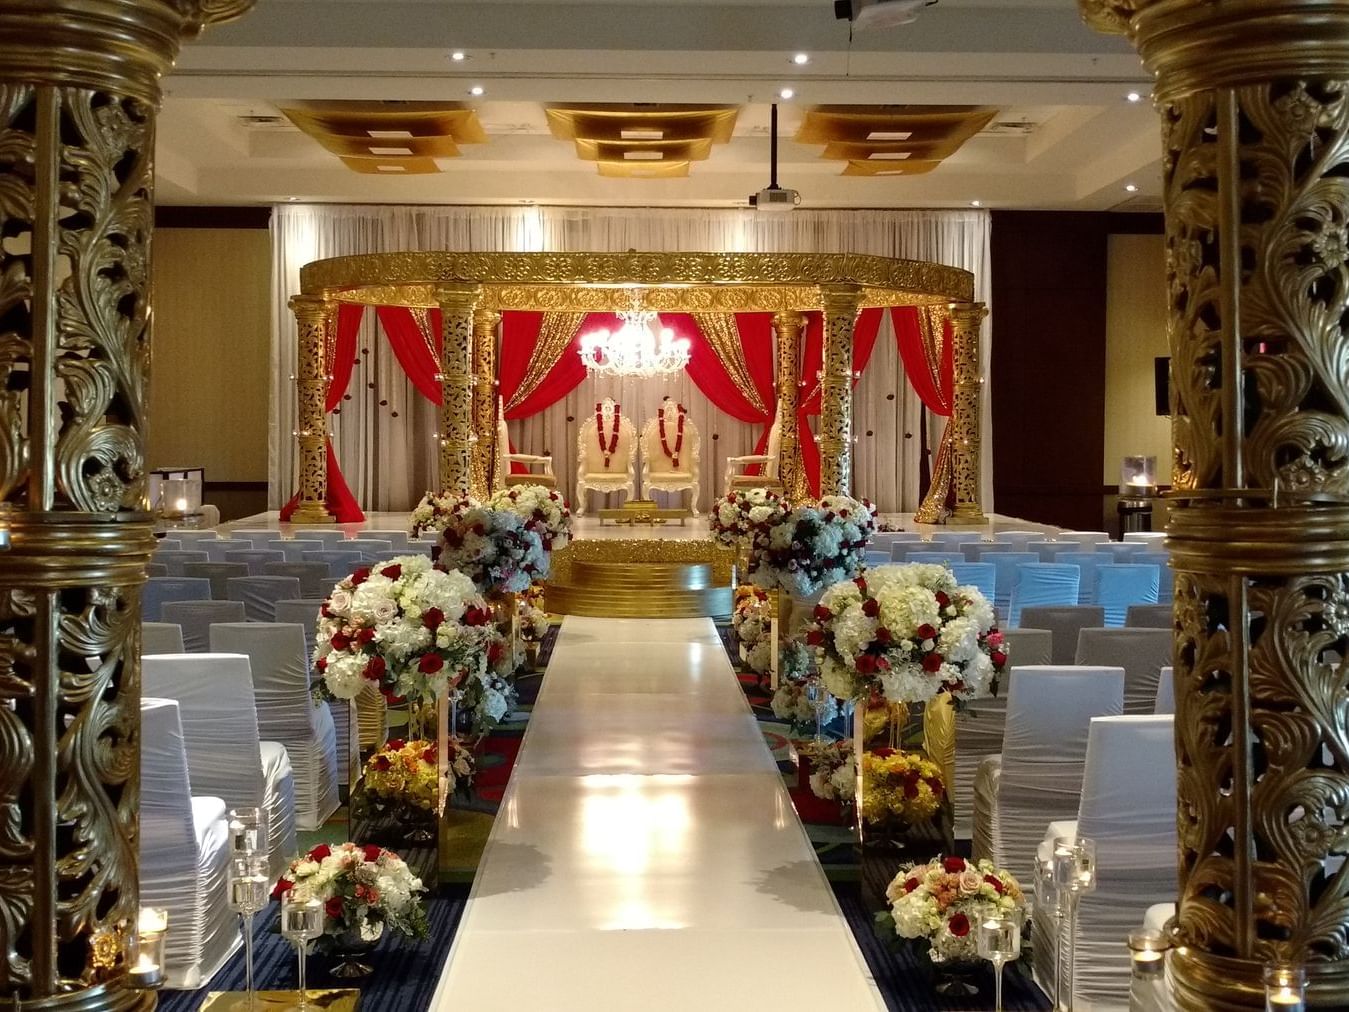 wedding aisle with flowers and chairs facing altar